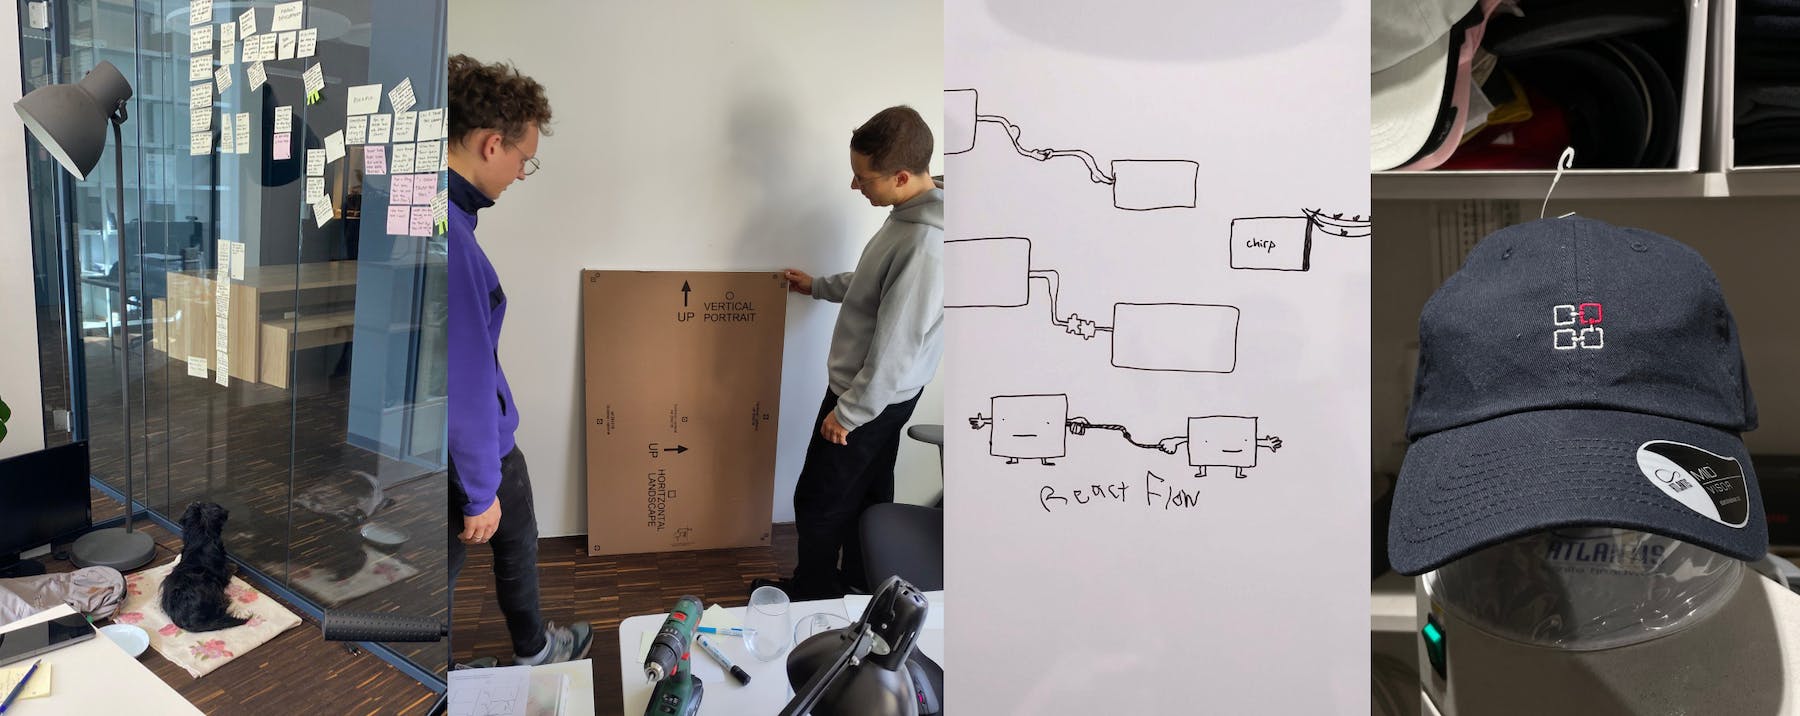 Pictures of a dog in an office, Christopher and Moritz looking at a whiteboard cardboard template, whiteboard sketches, and a hat with the React Flow logo 